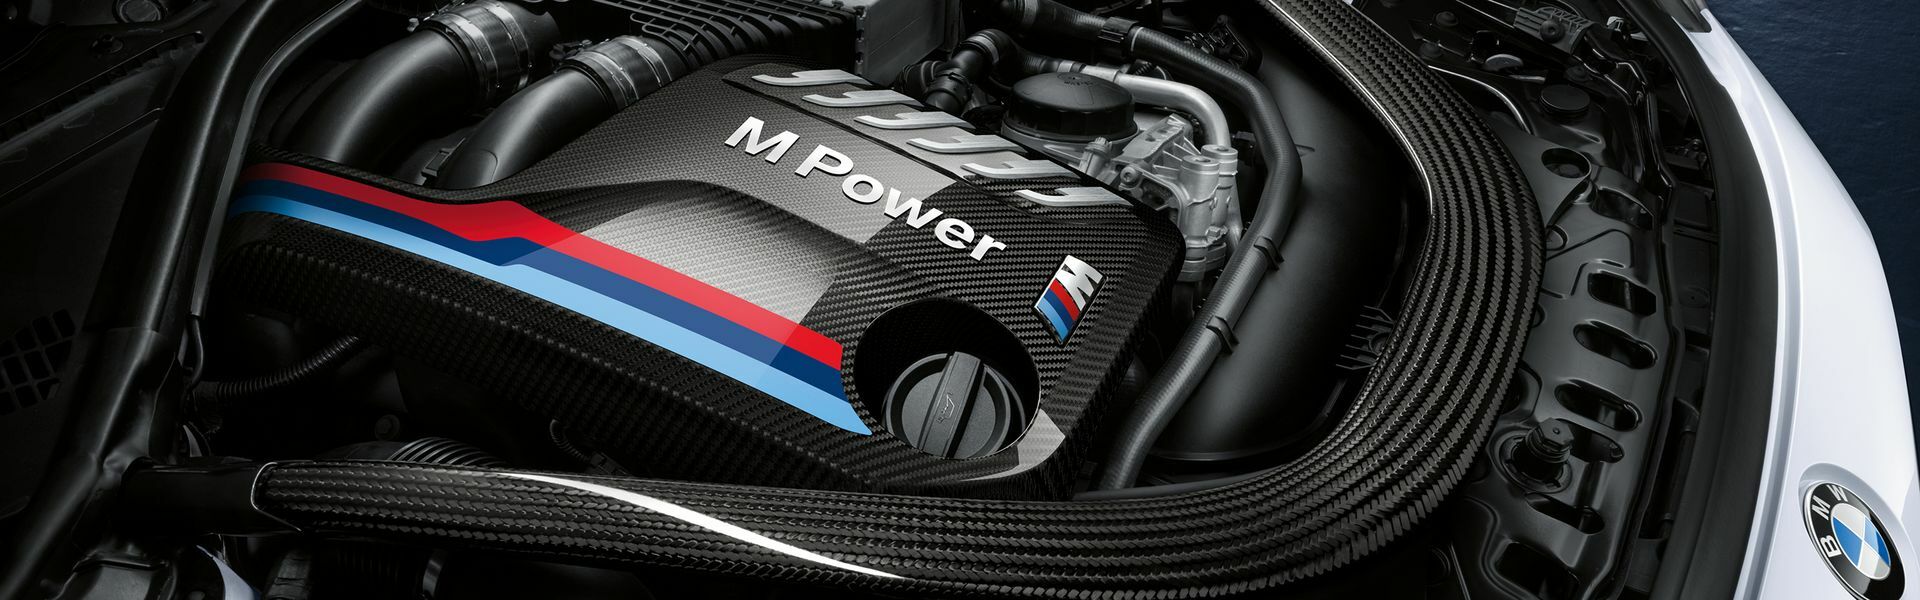 Performance enhancements/ Software modifications/ Small performance parts for BMW M6 E63, E64